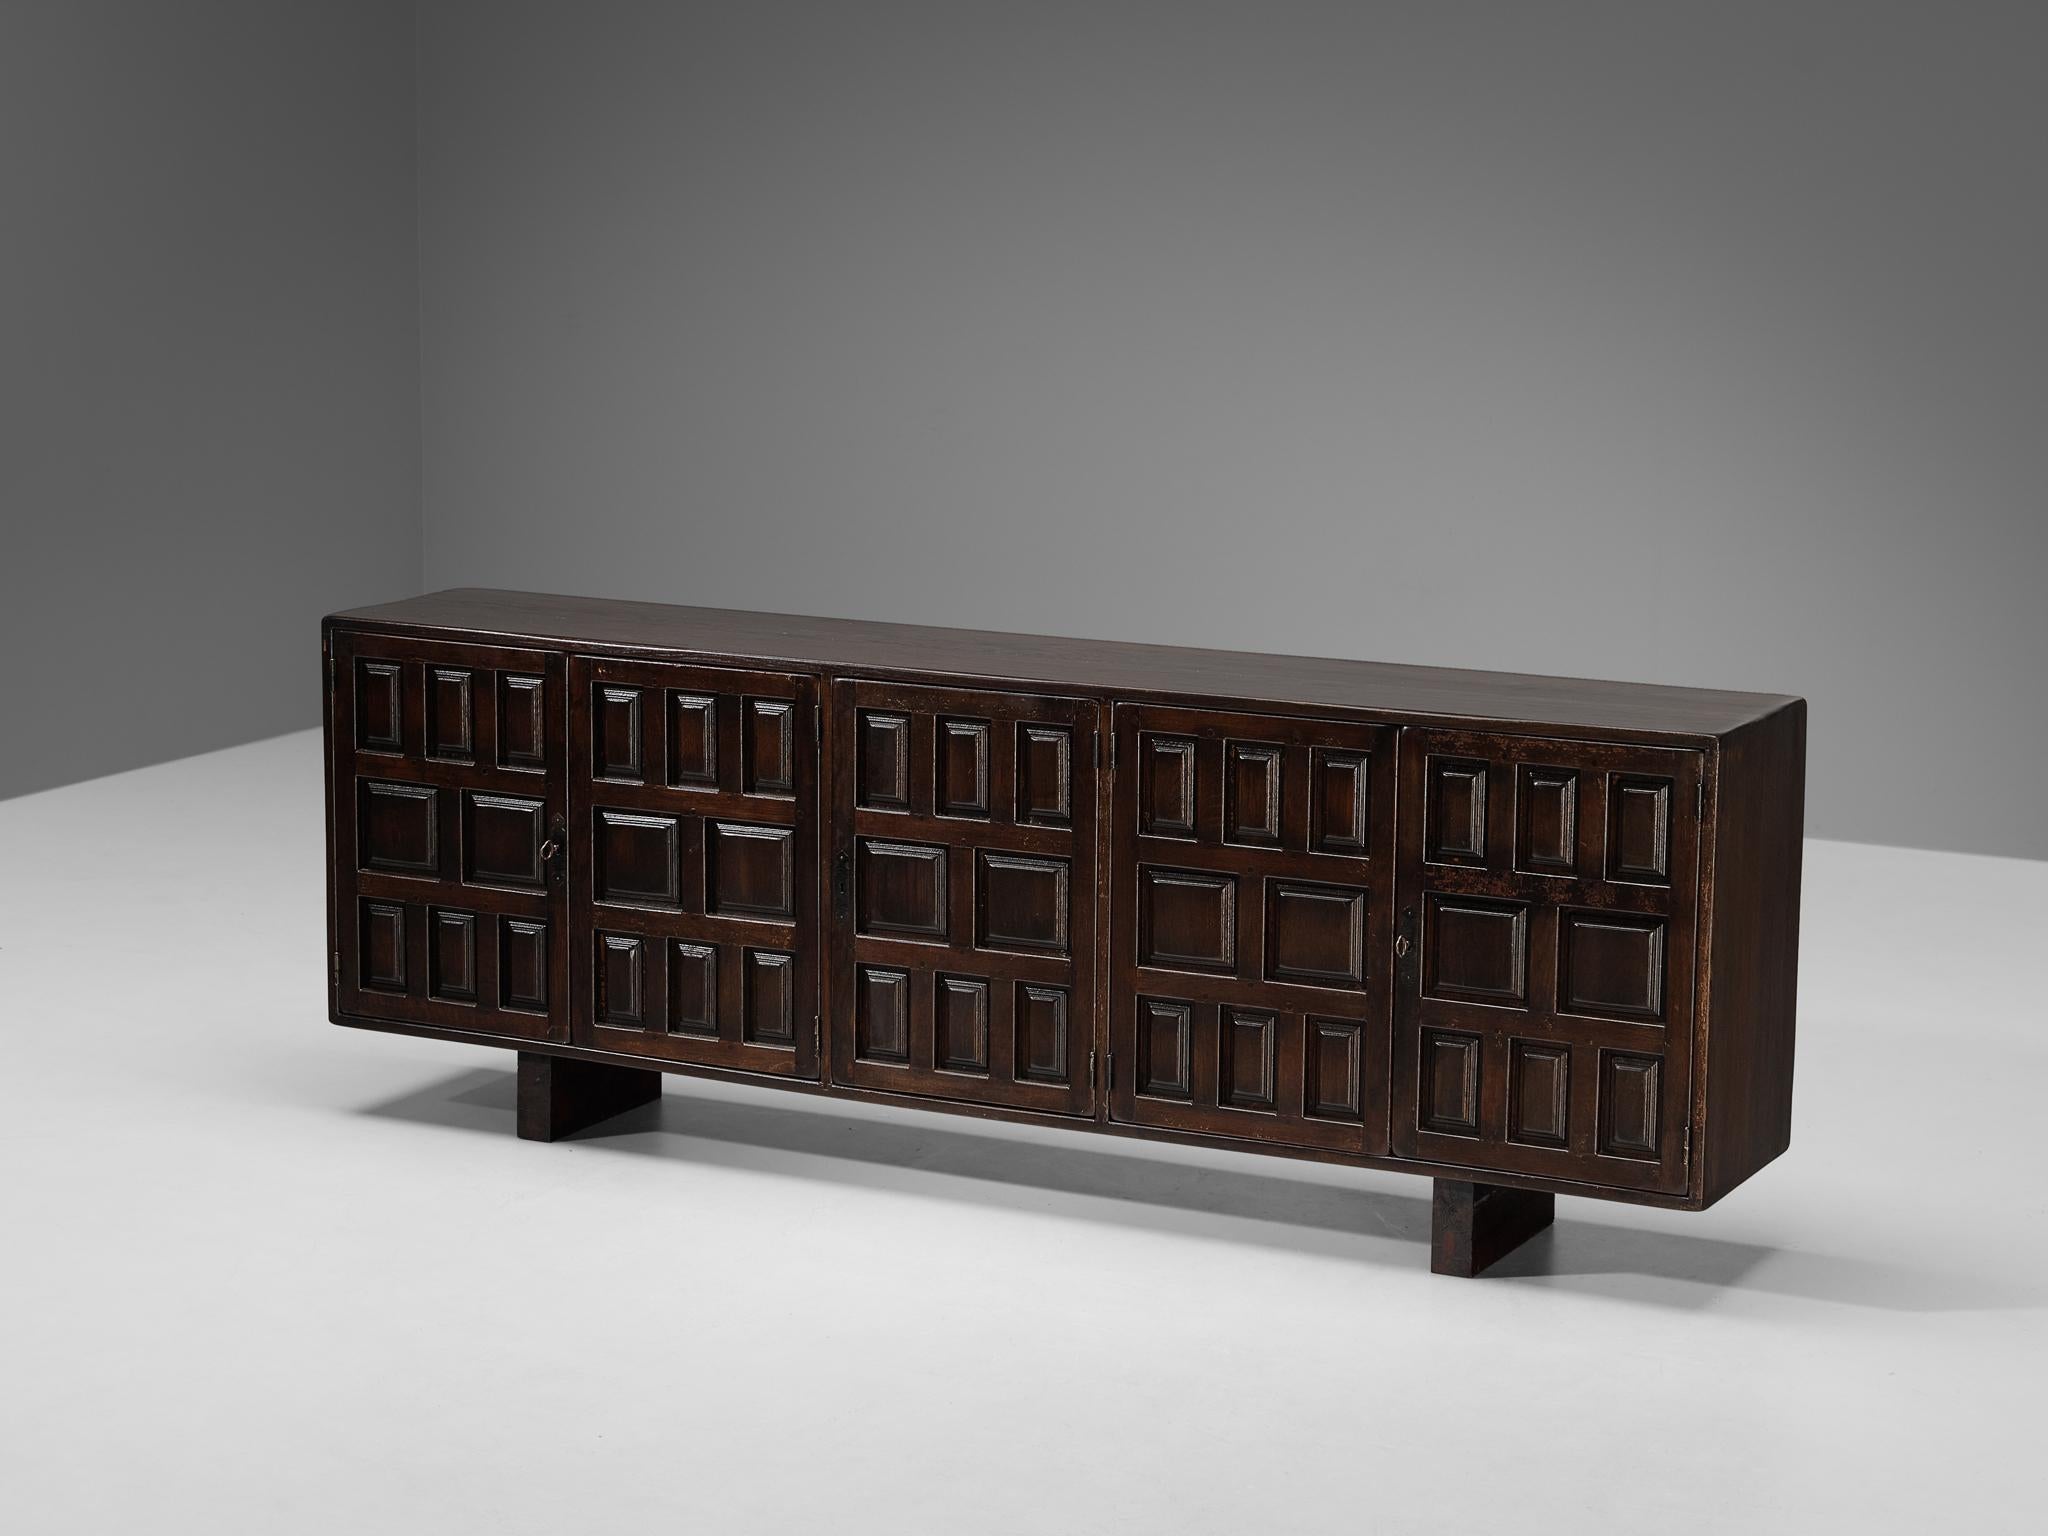 Sideboard, stained oak, iron, Spain, 1970s.

This cabinet originates from Spain and shows the decorative characteristics of the 16th century Castilian furniture design. The carved geometric shapes on the door panels immediately catch the eye and are